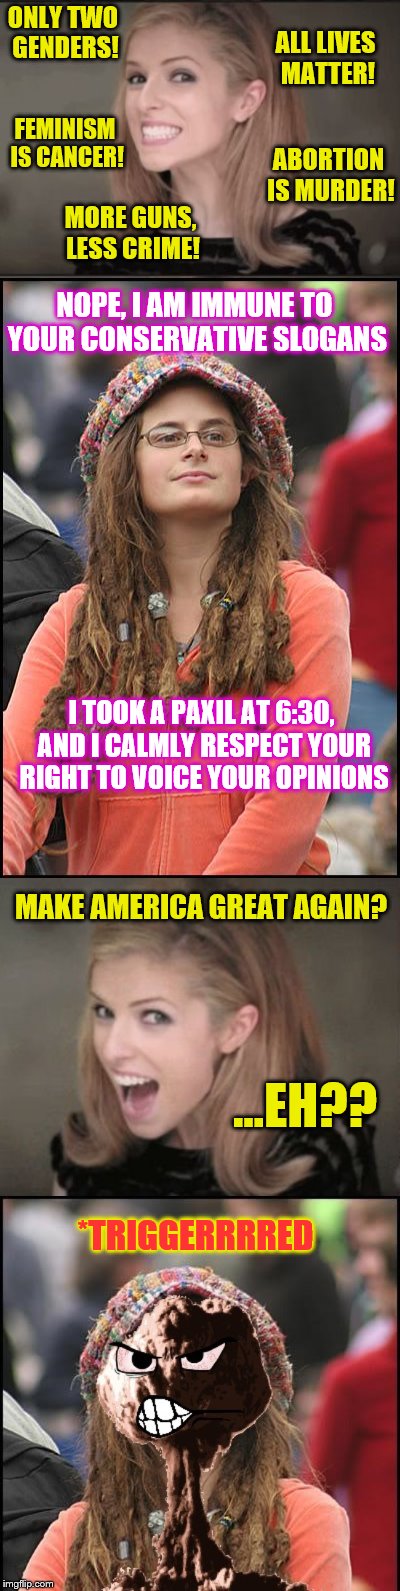 The Anna Kendrick Challenge | ONLY TWO GENDERS! ALL LIVES MATTER! FEMINISM IS CANCER! ABORTION IS MURDER! MORE GUNS, LESS CRIME! NOPE, I AM IMMUNE TO YOUR CONSERVATIVE SLOGANS; I TOOK A PAXIL AT 6:30, AND I CALMLY RESPECT YOUR RIGHT TO VOICE YOUR OPINIONS; MAKE AMERICA GREAT AGAIN? ...EH?? *TRIGGERRRRED | image tagged in memes,funny,phunny,anna kendrick,college liberal | made w/ Imgflip meme maker